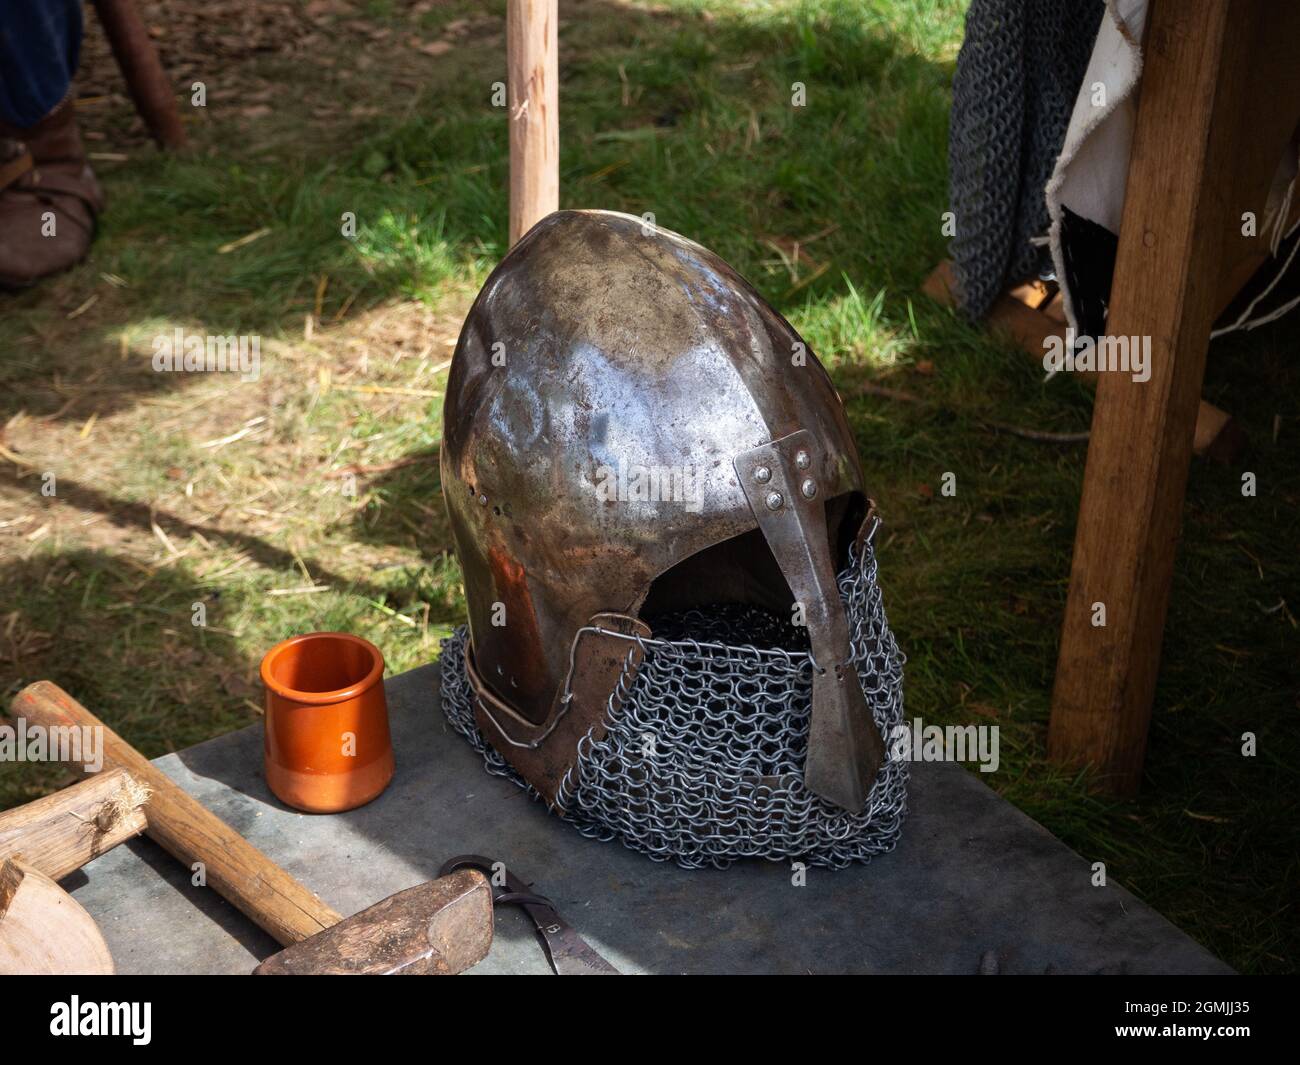 Old medieval armor helmet on the table Stock Photo